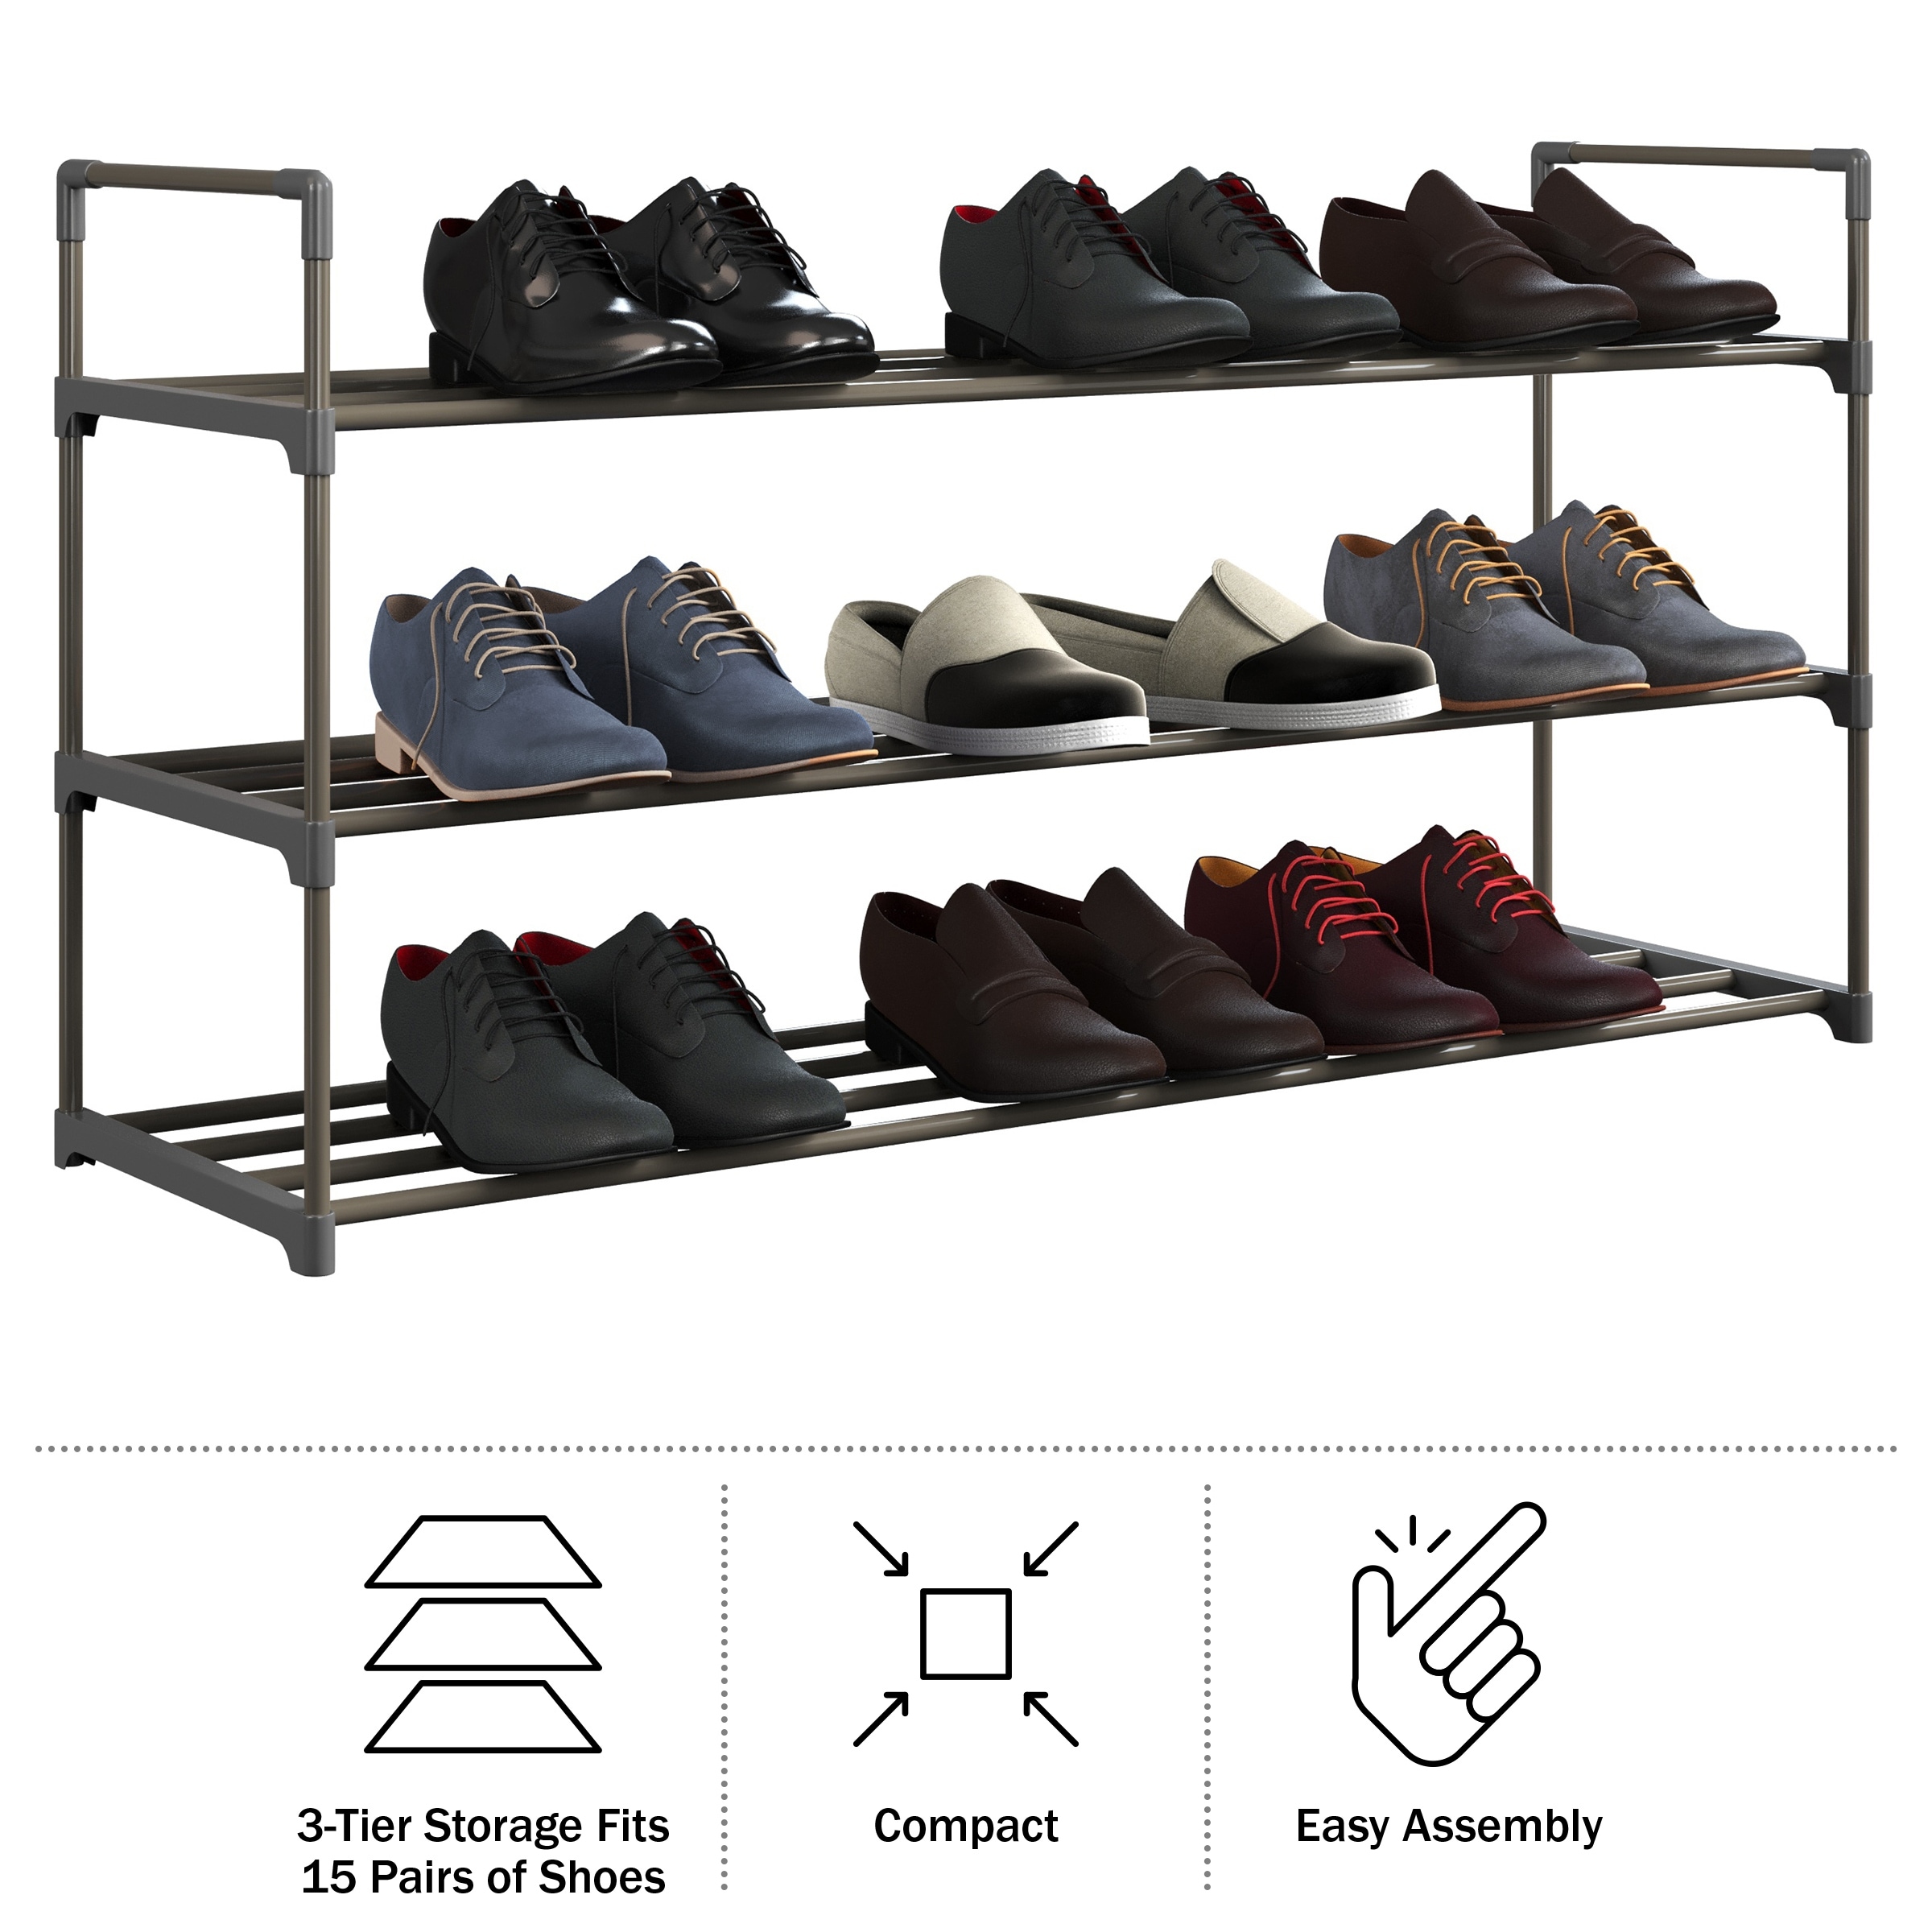 https://ak1.ostkcdn.com/images/products/is/images/direct/dc231886f2512cbf3c5cbffb5cfc5a02d4a39883/Shoe-Rack-%E2%80%93-Multi--Tier-Shoe-Organizer-by-Hastings-Home-%28Gray%29.jpg